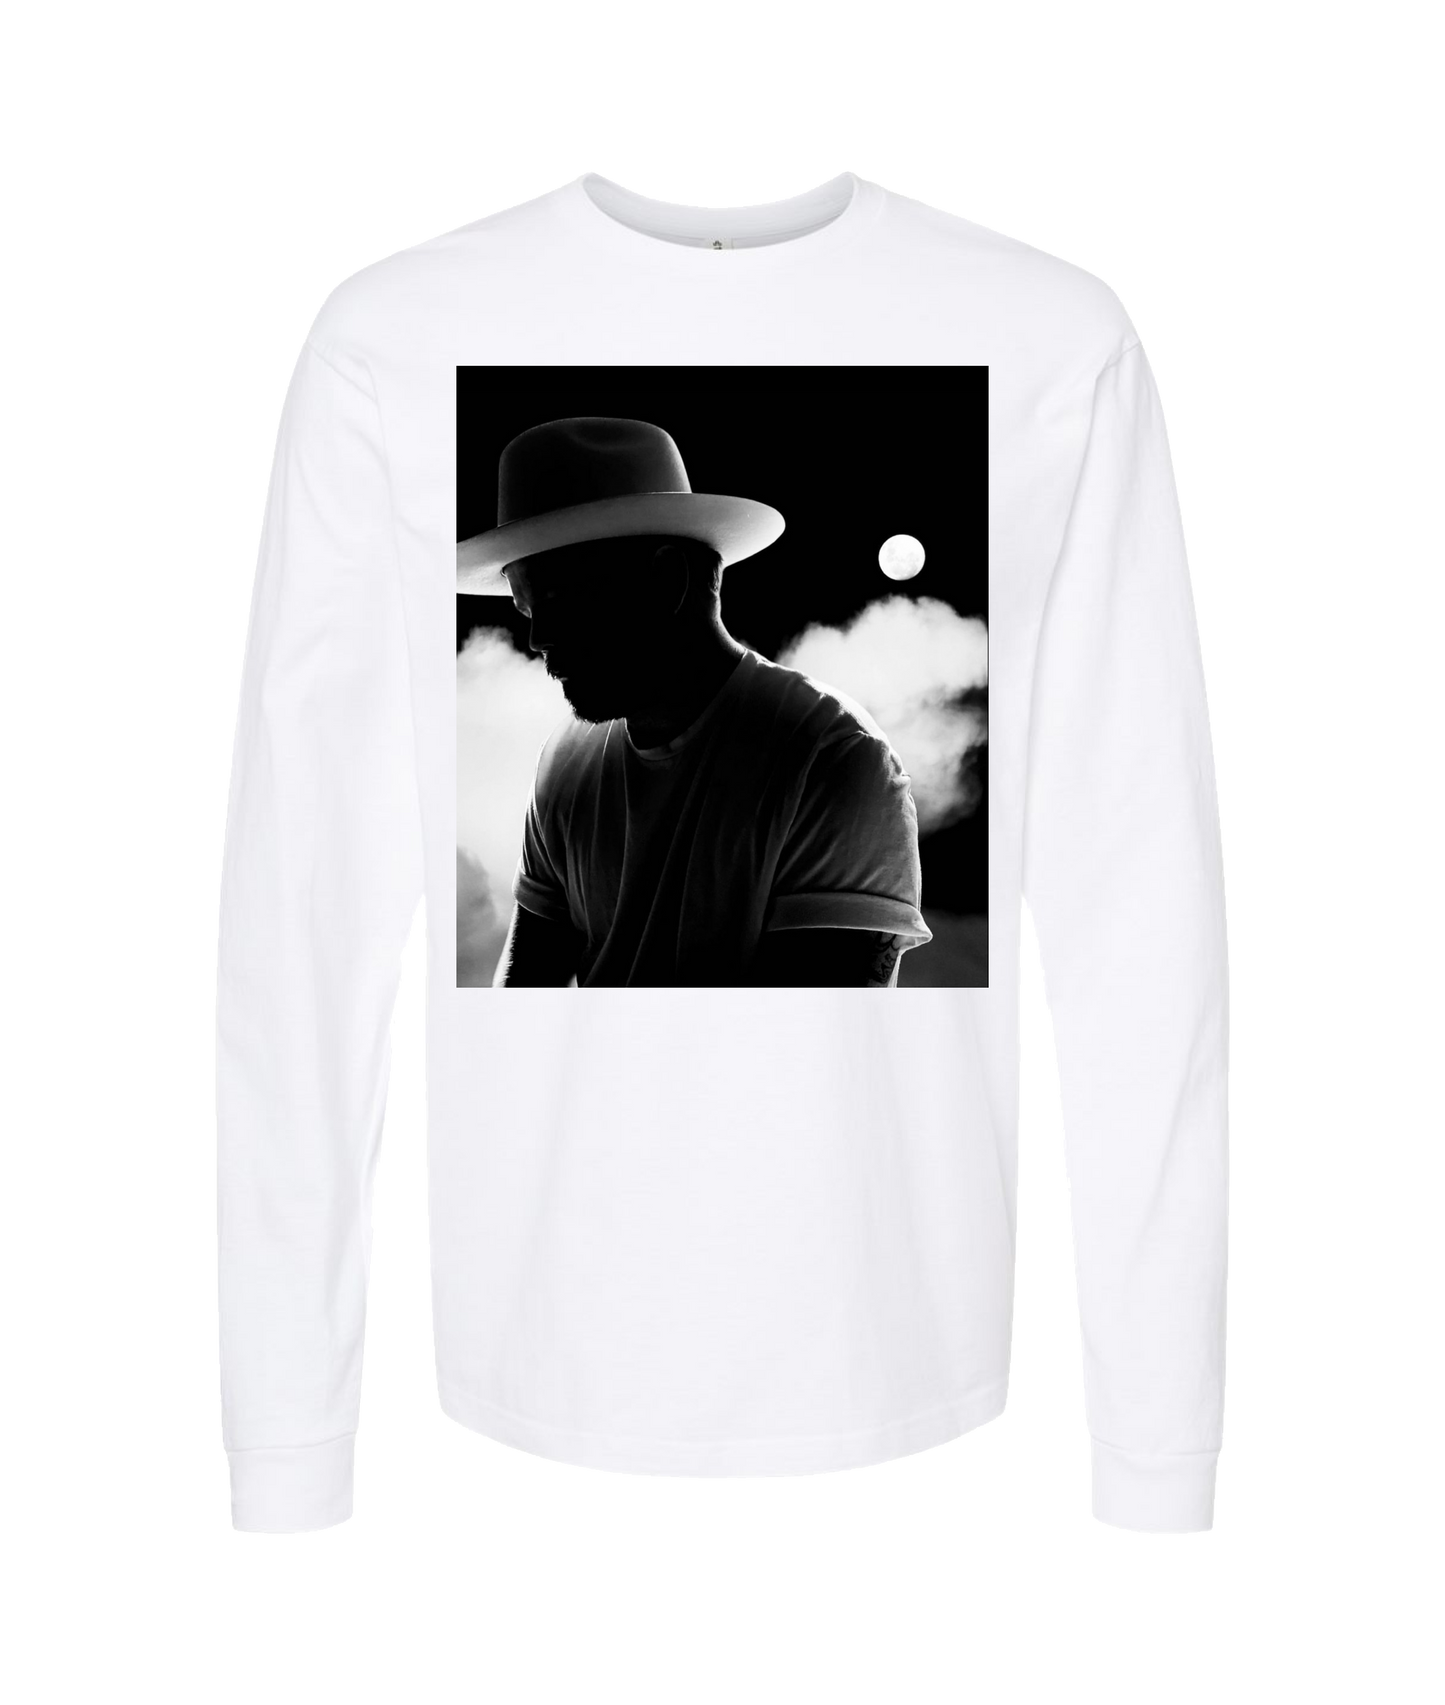 Andy Crosby Music - Holy Vices - White Long Sleeve T